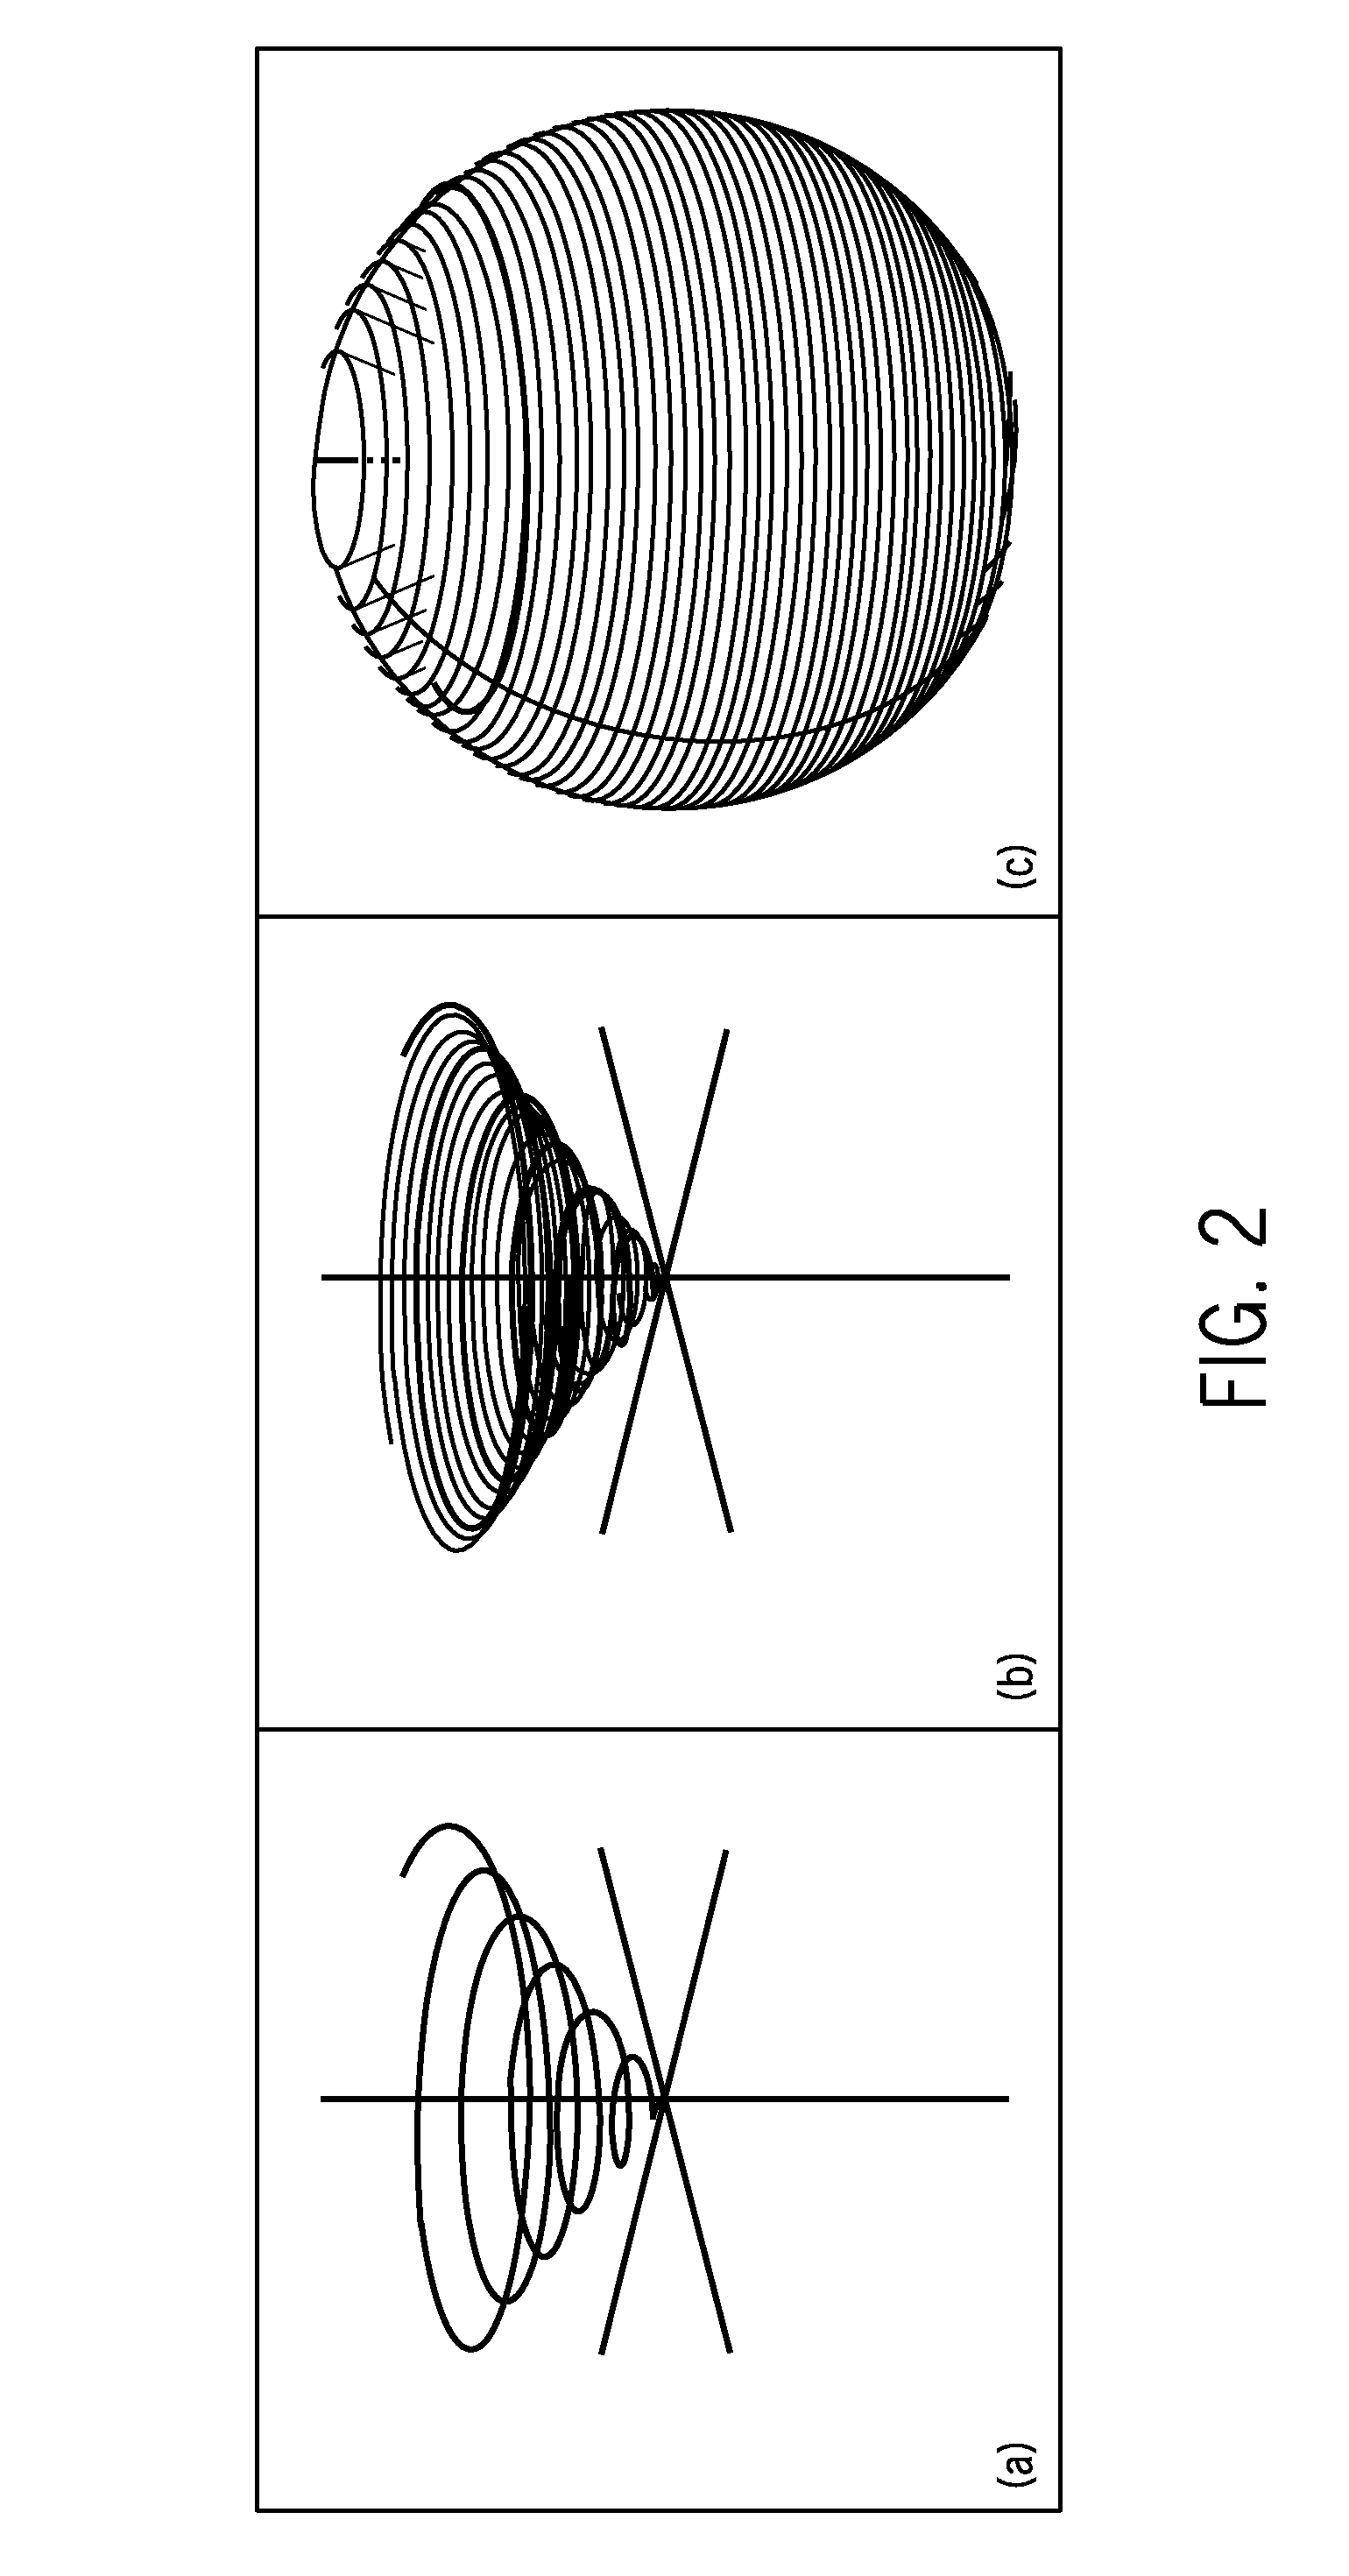 System and Method for Magnetic Resonance Imaging Using Three-Dimensional, Distributed, Non-Cartesian Sampling Trajectories